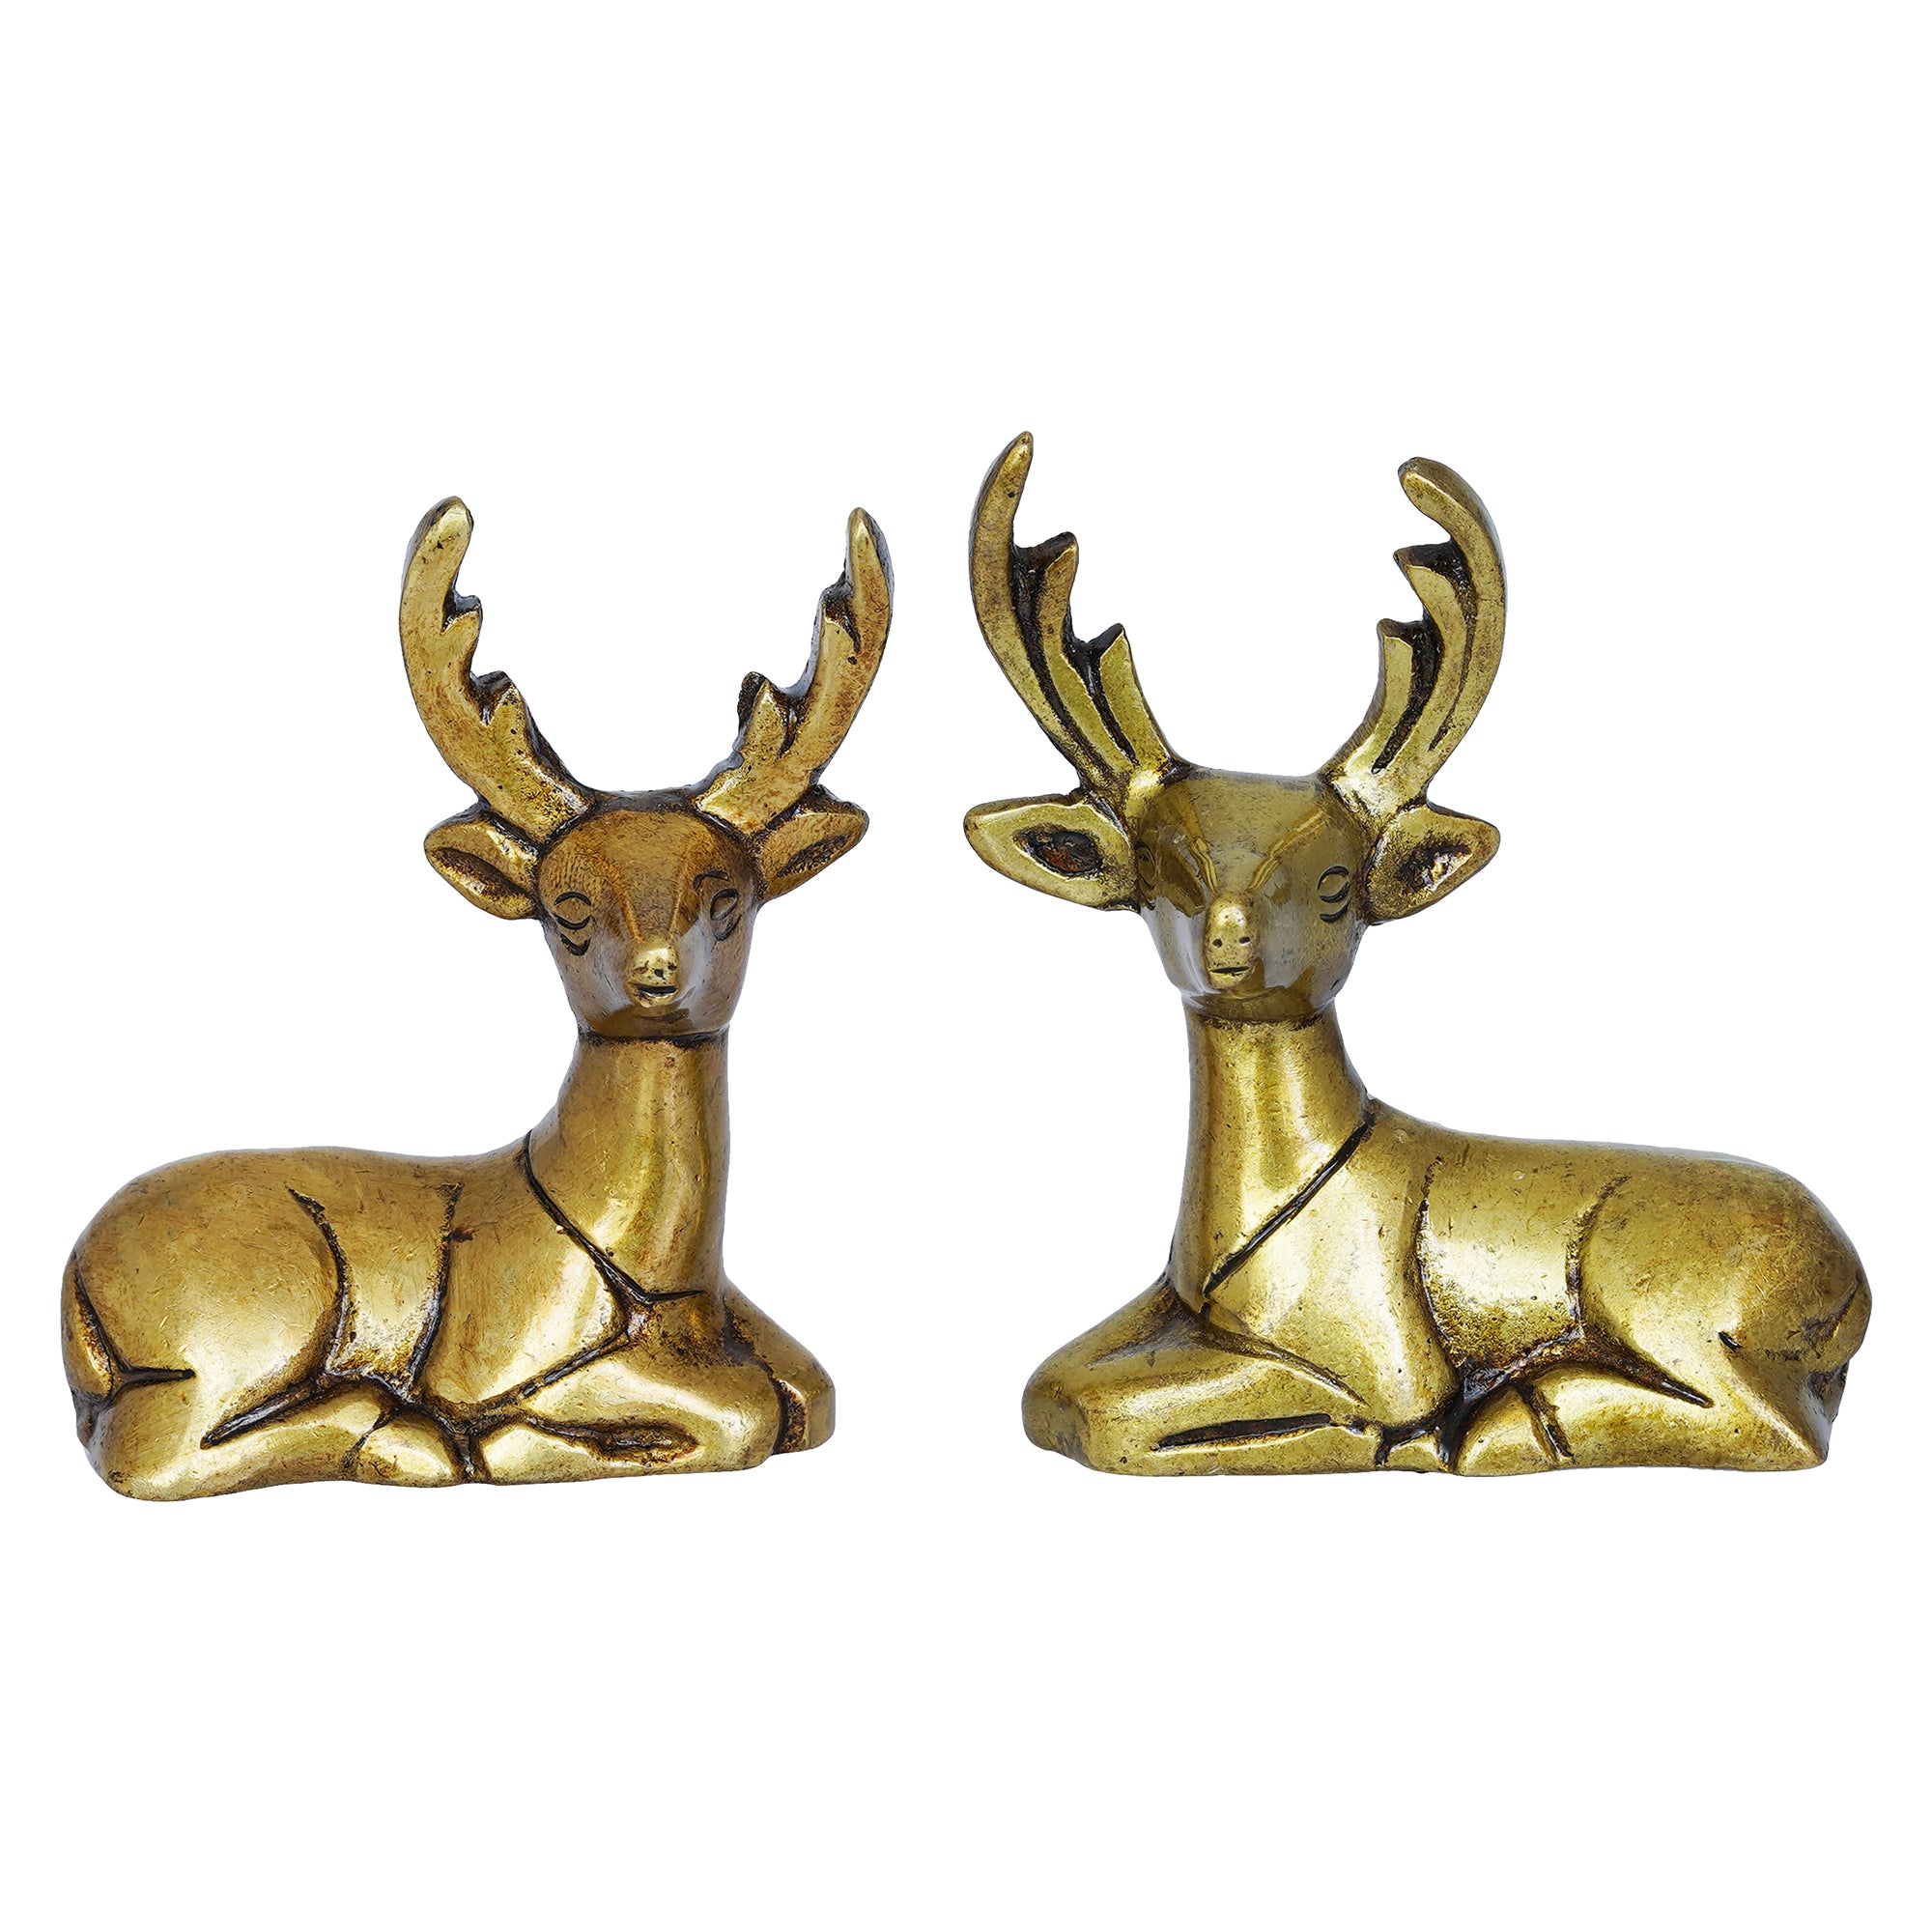 Set of 2 Golden Brass Deer Statues Showpieces - Animal Figurines for Home Decoration - Gift for Christmas, Winter Festivities, and Holiday Celebrations 2